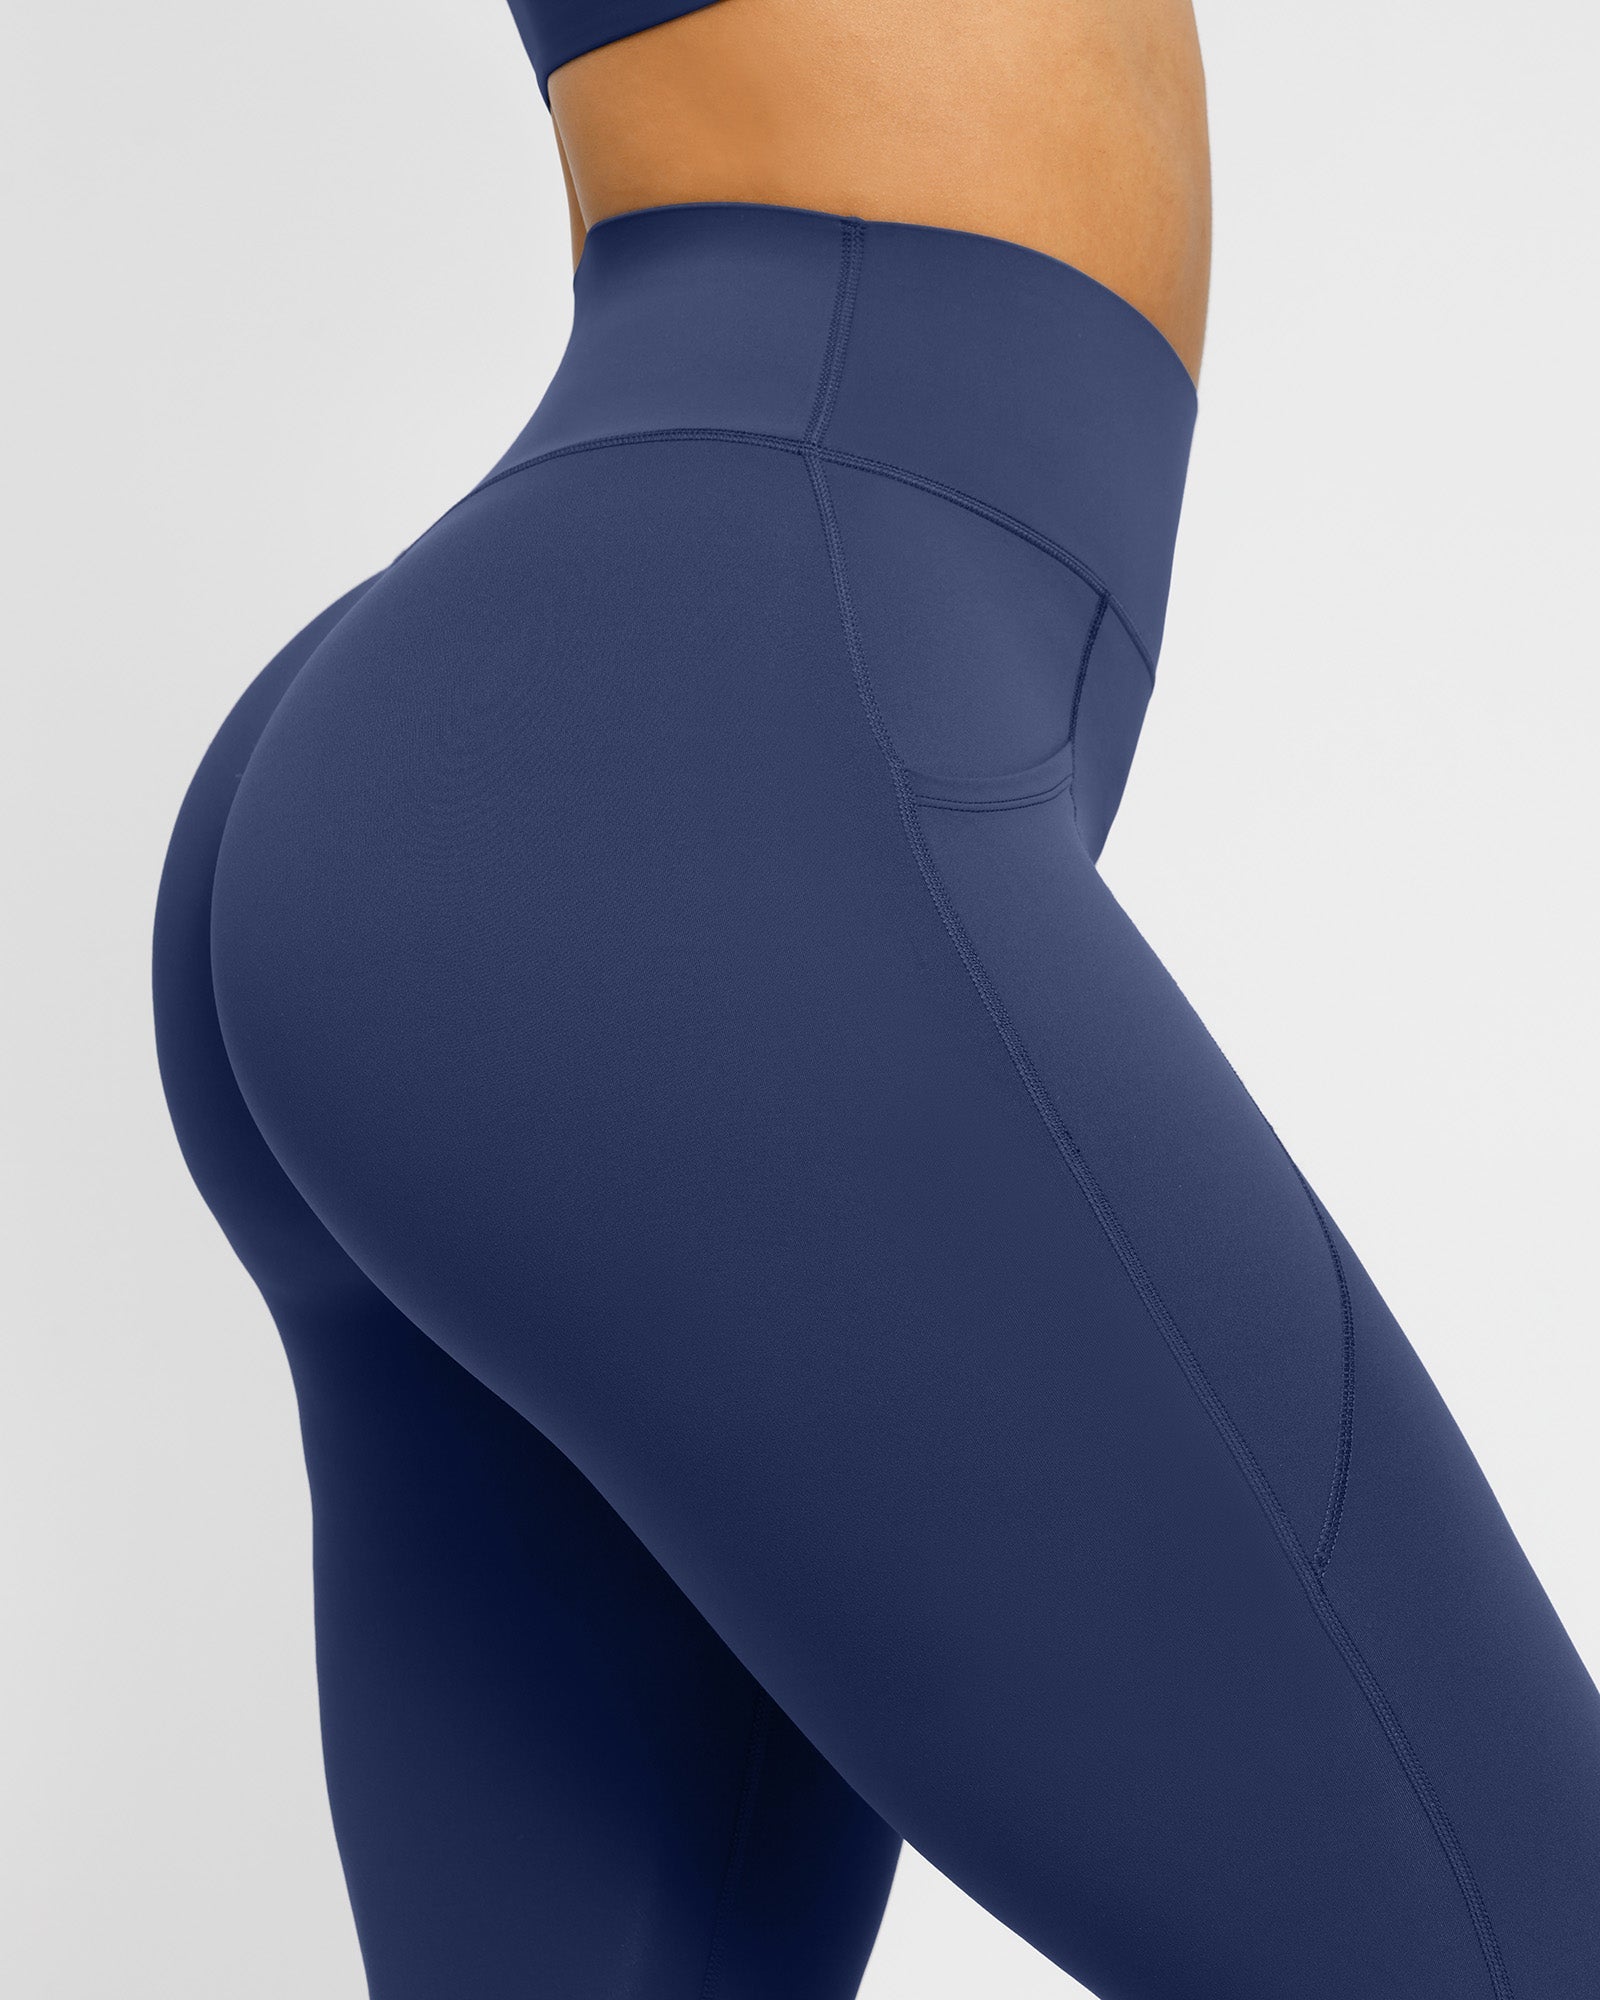 Cosmolle Yoga Suits and High-Waist Leggings: A Great Way to